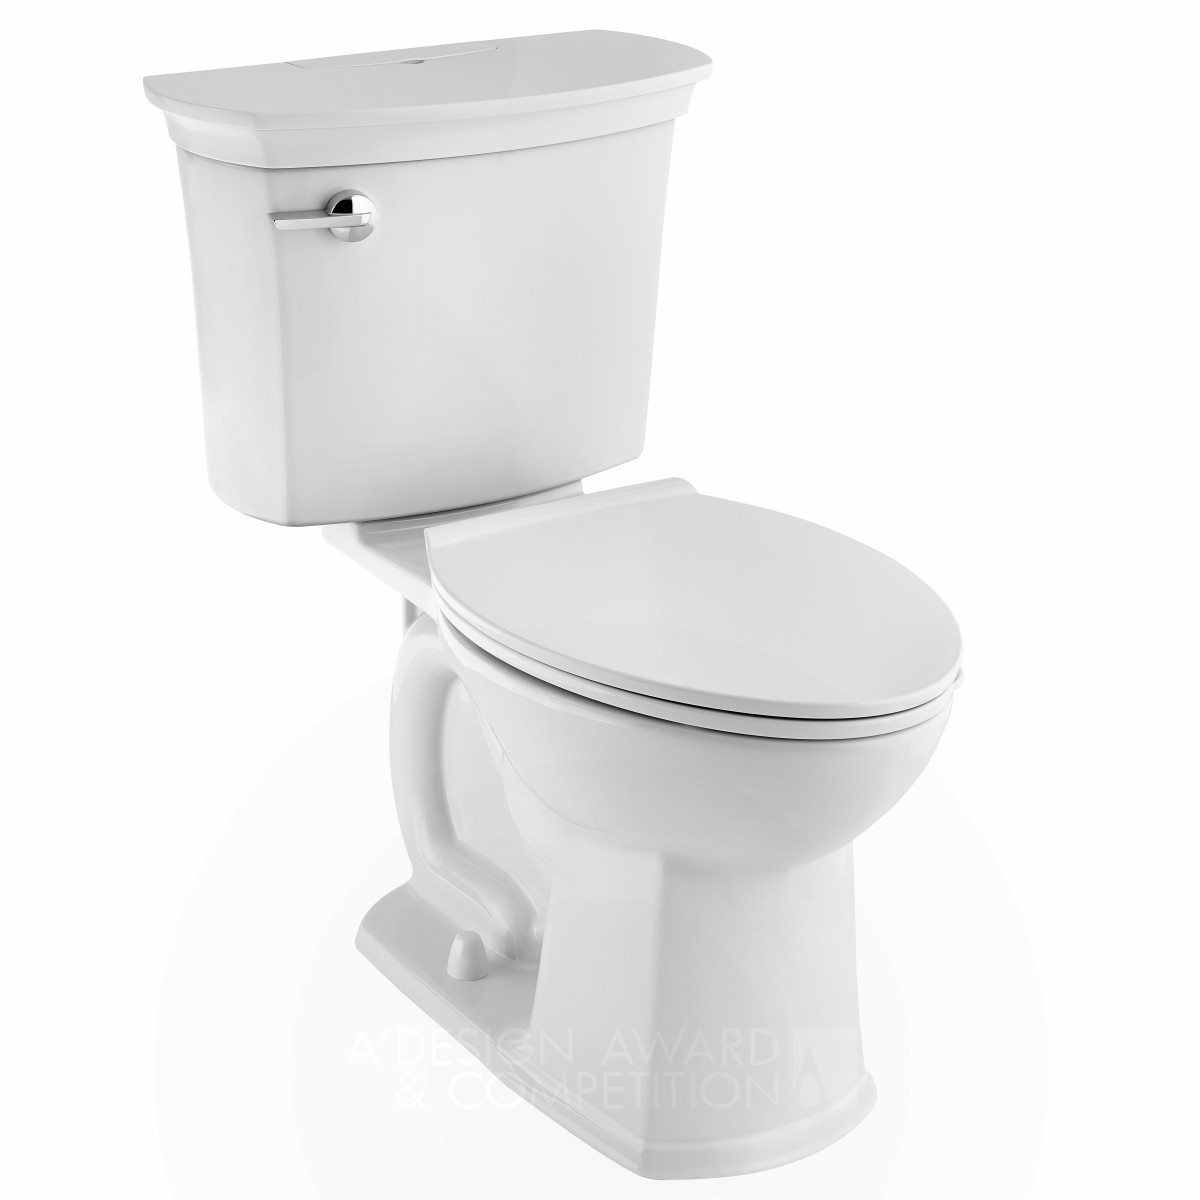 ActiClean Self Cleaning Toilet